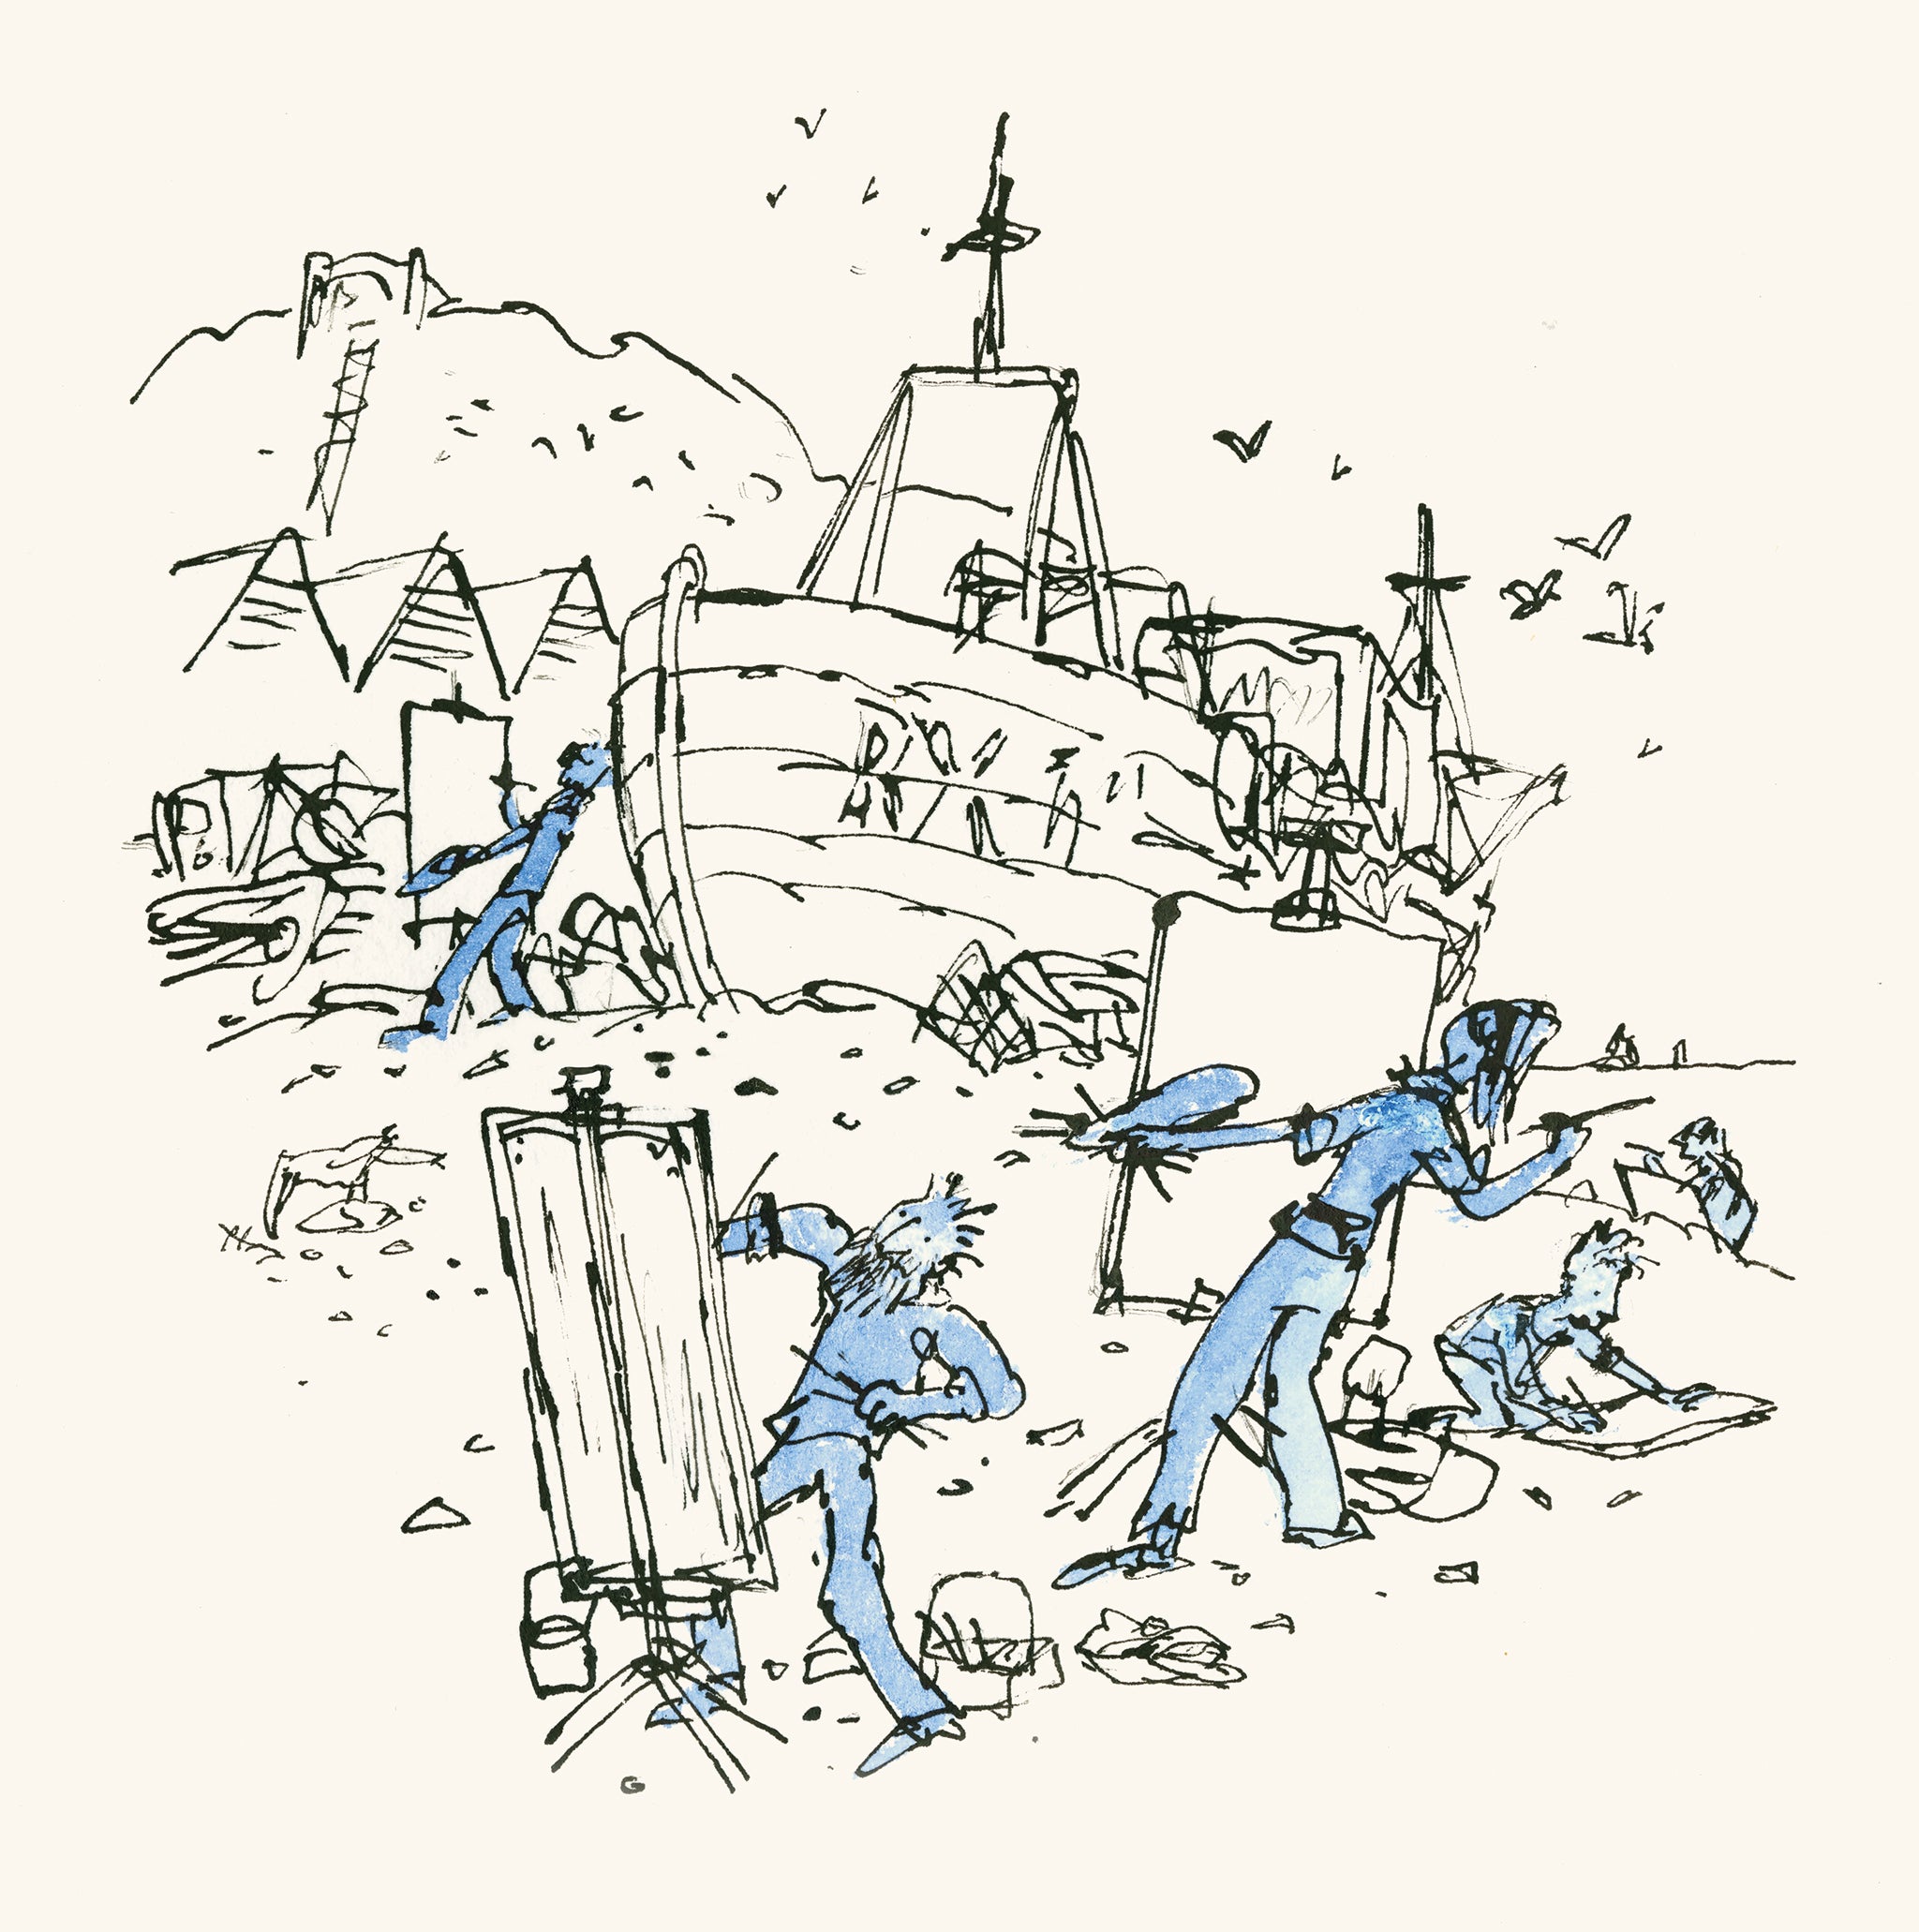 Quentin Blake's 'Artists on the beach'